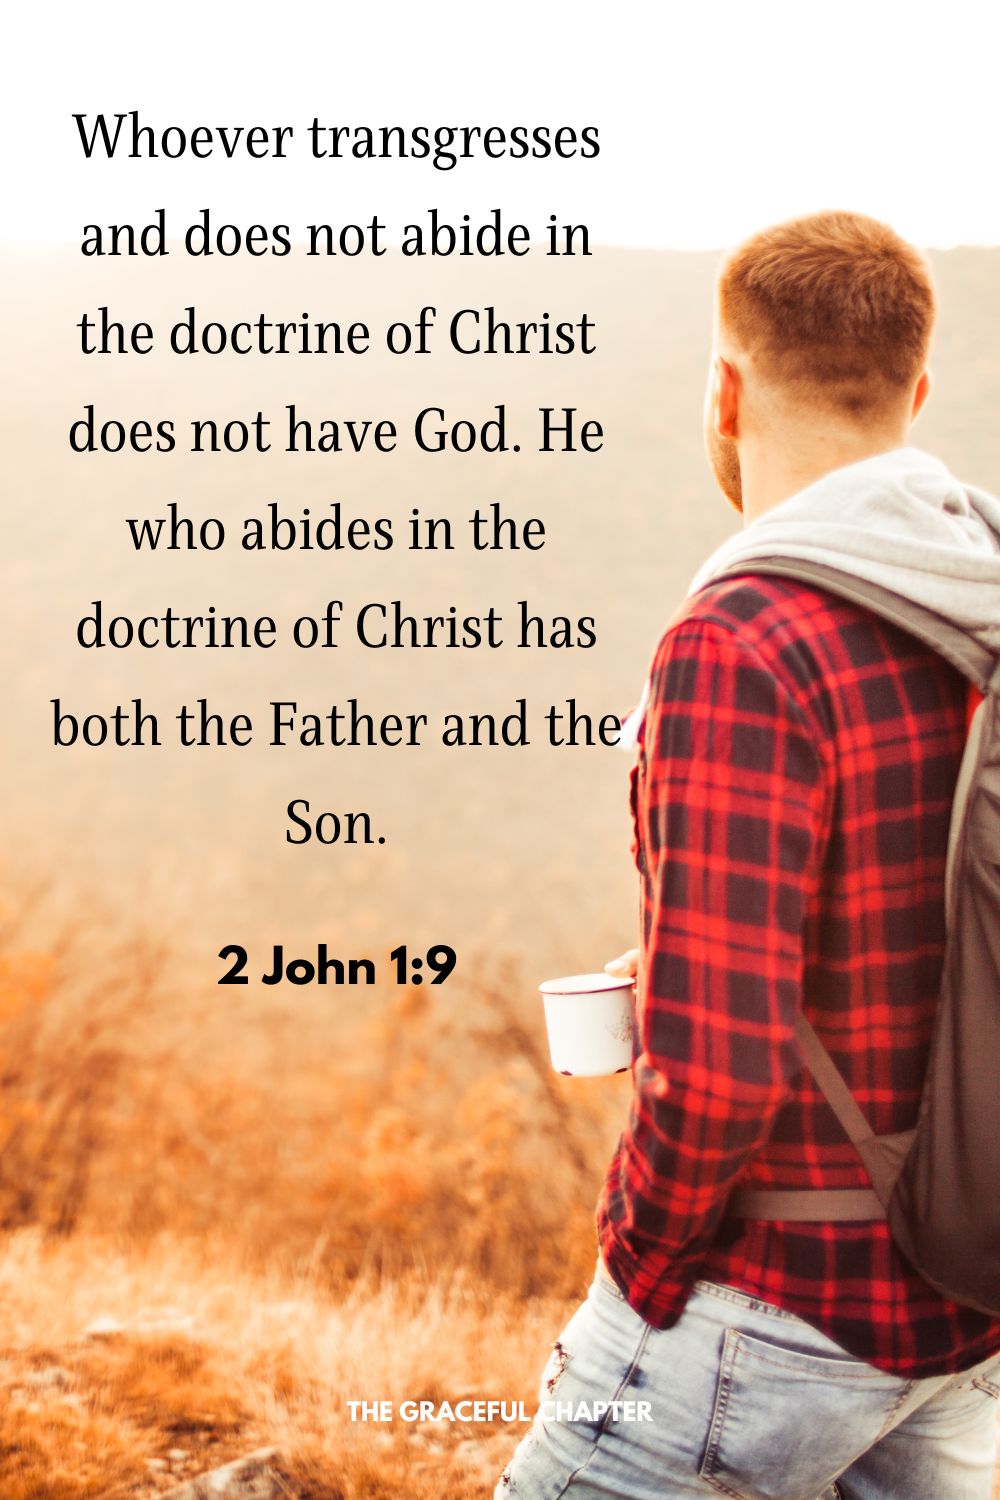 Whoever transgresses and does not abide in the doctrine of Christ does not have God. He who abides in the doctrine of Christ has both the Father and the Son.2 John 1:9